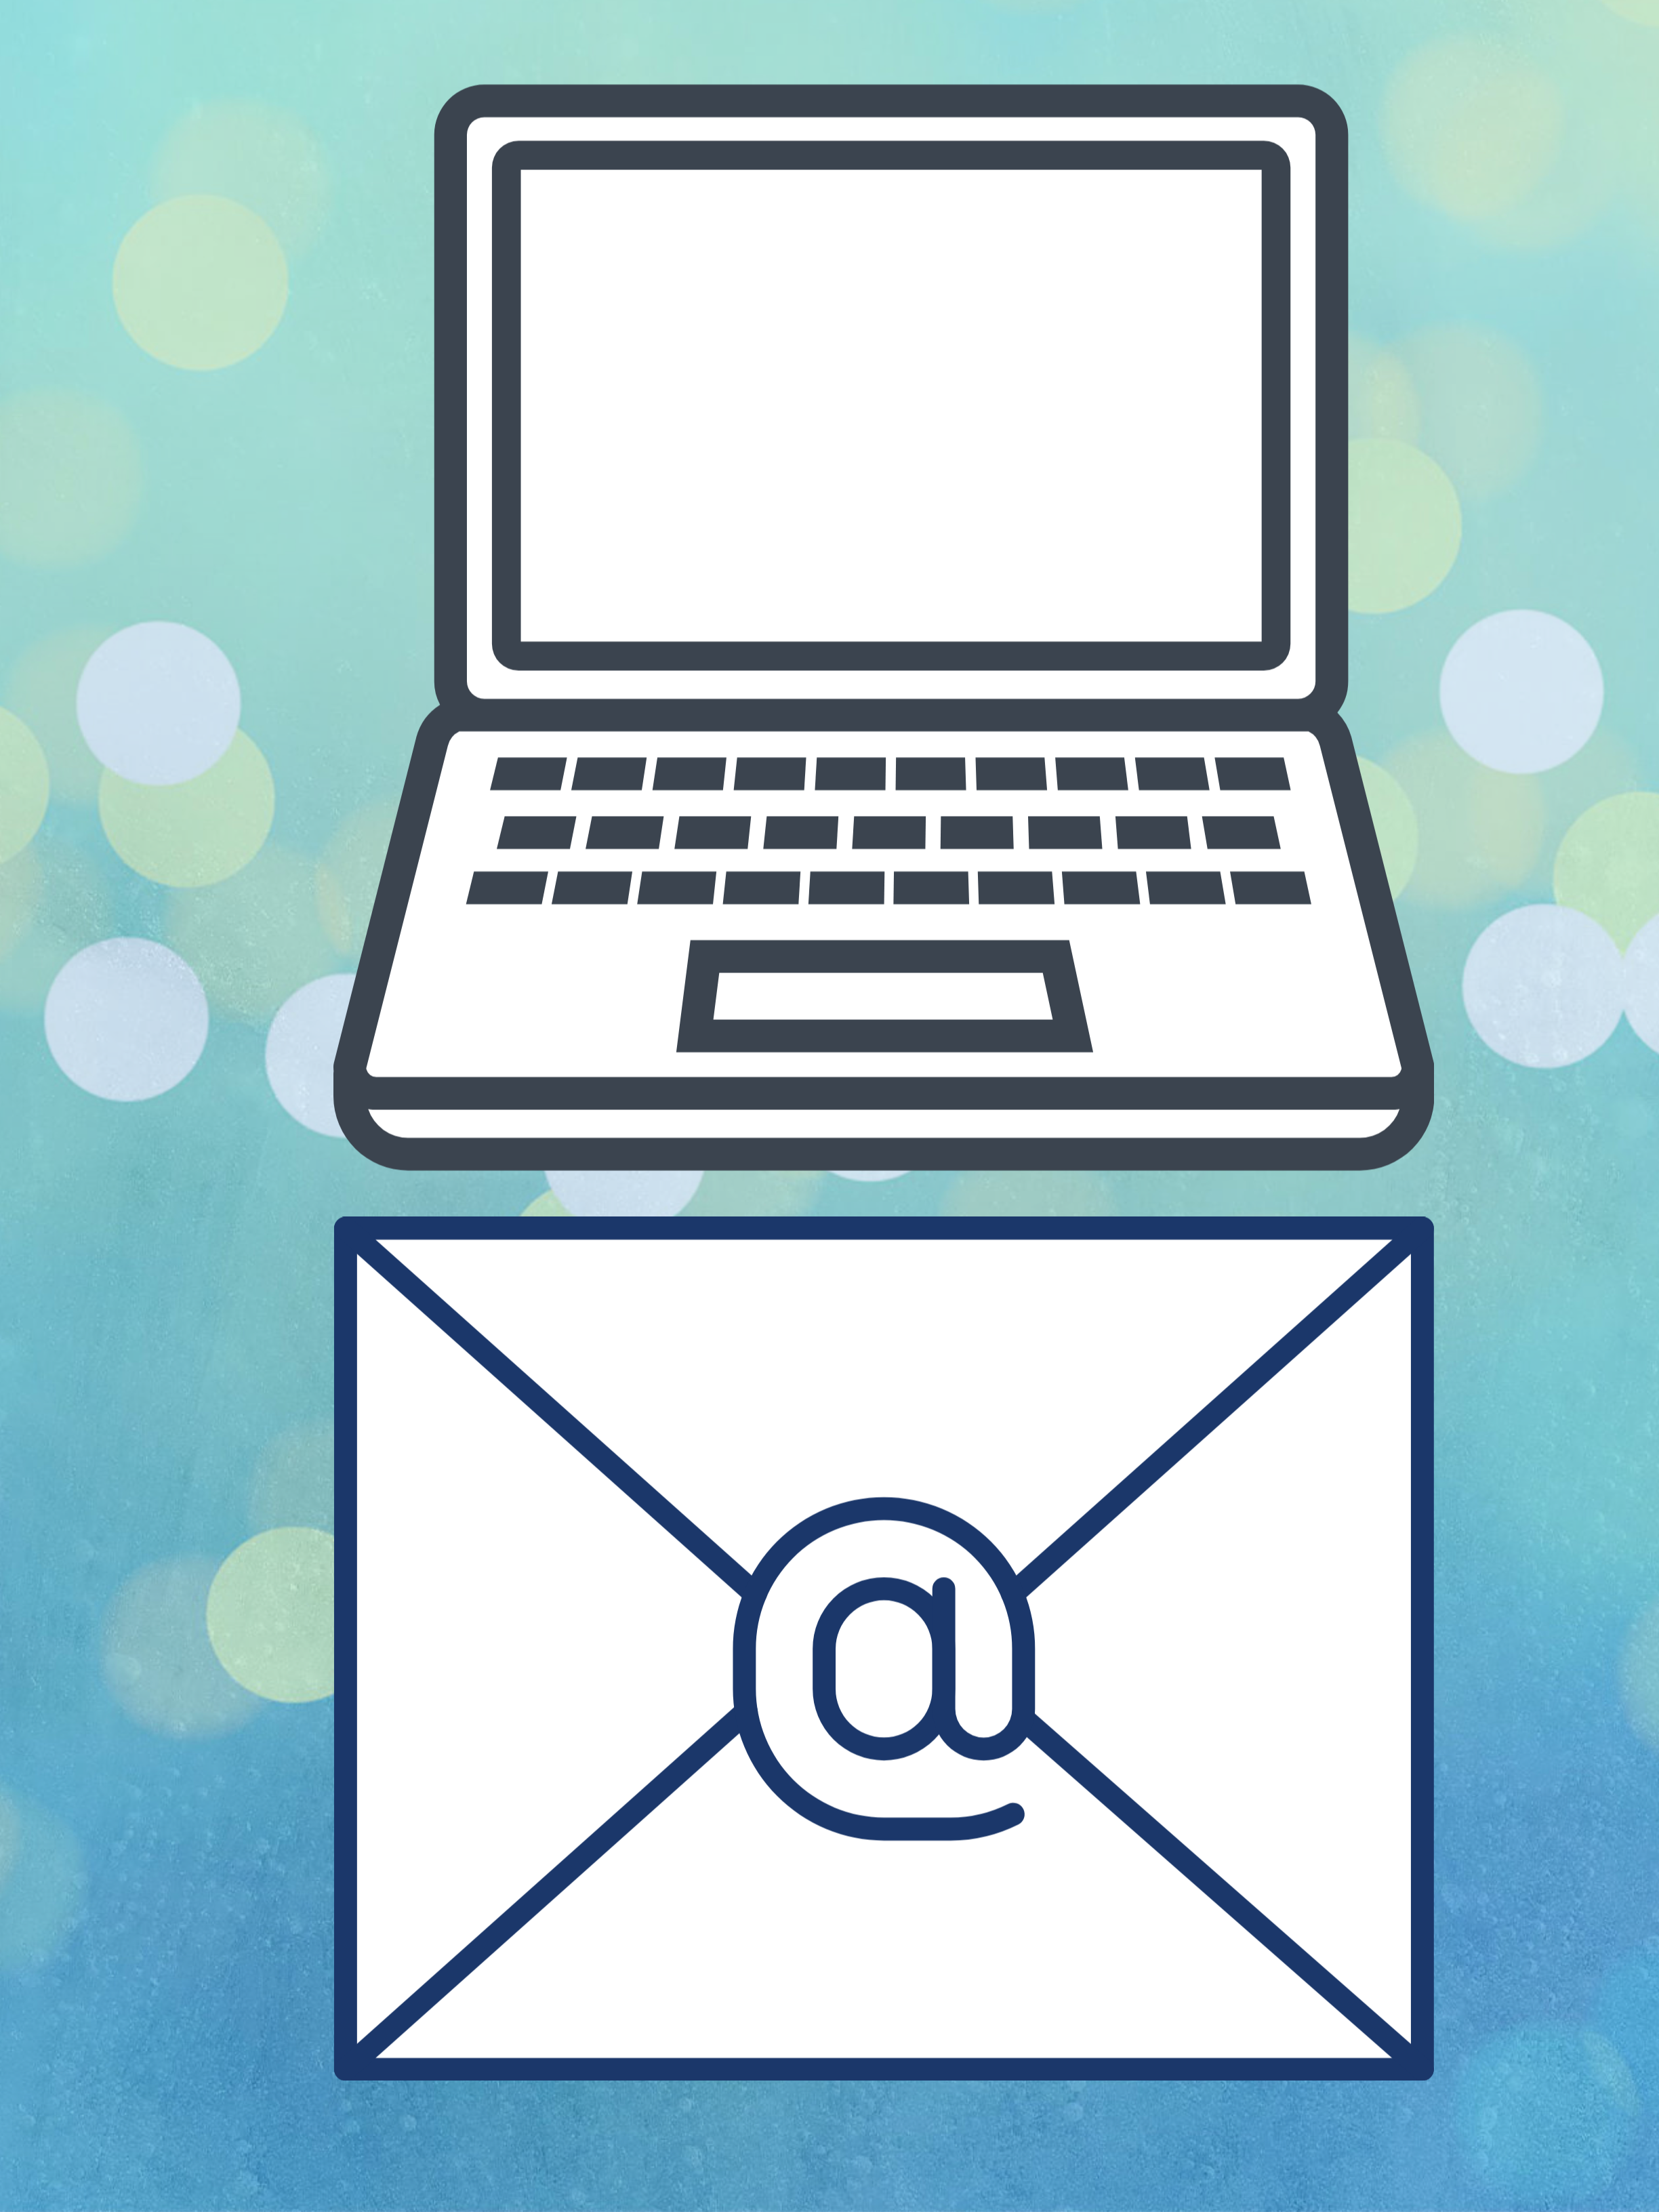 Email management tips from Margo Crawford Productivity Coach and Consultant